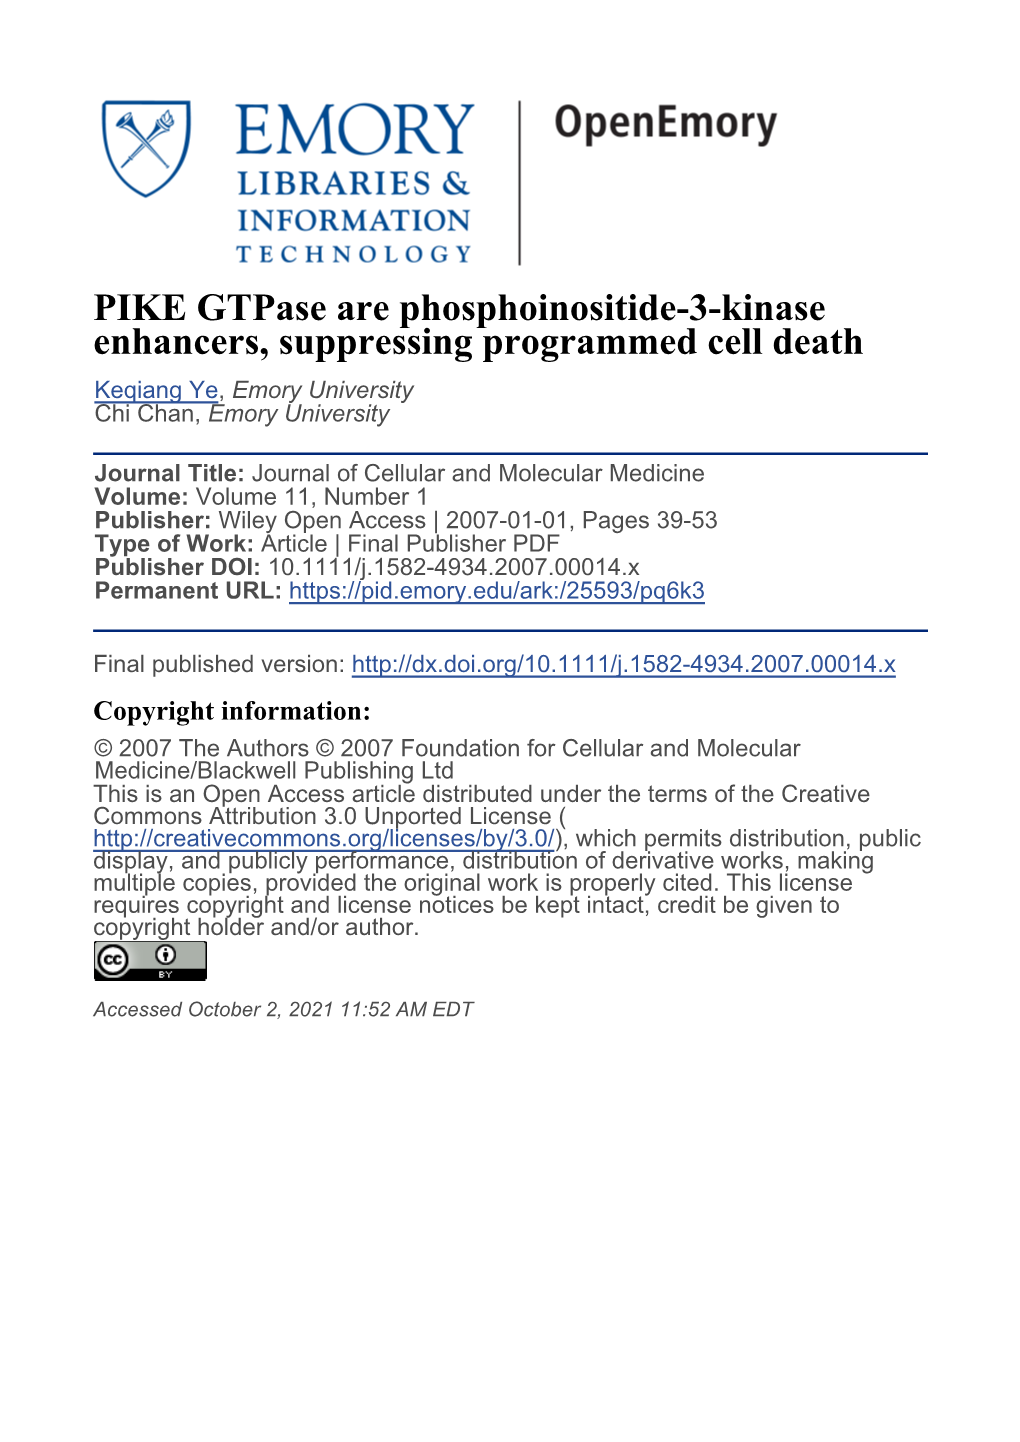 PIKE Gtpase Are Phosphoinositide-3-Kinase Enhancers, Suppressing Programmed Cell Death Keqiang Ye, Emory University Chi Chan, Emory University